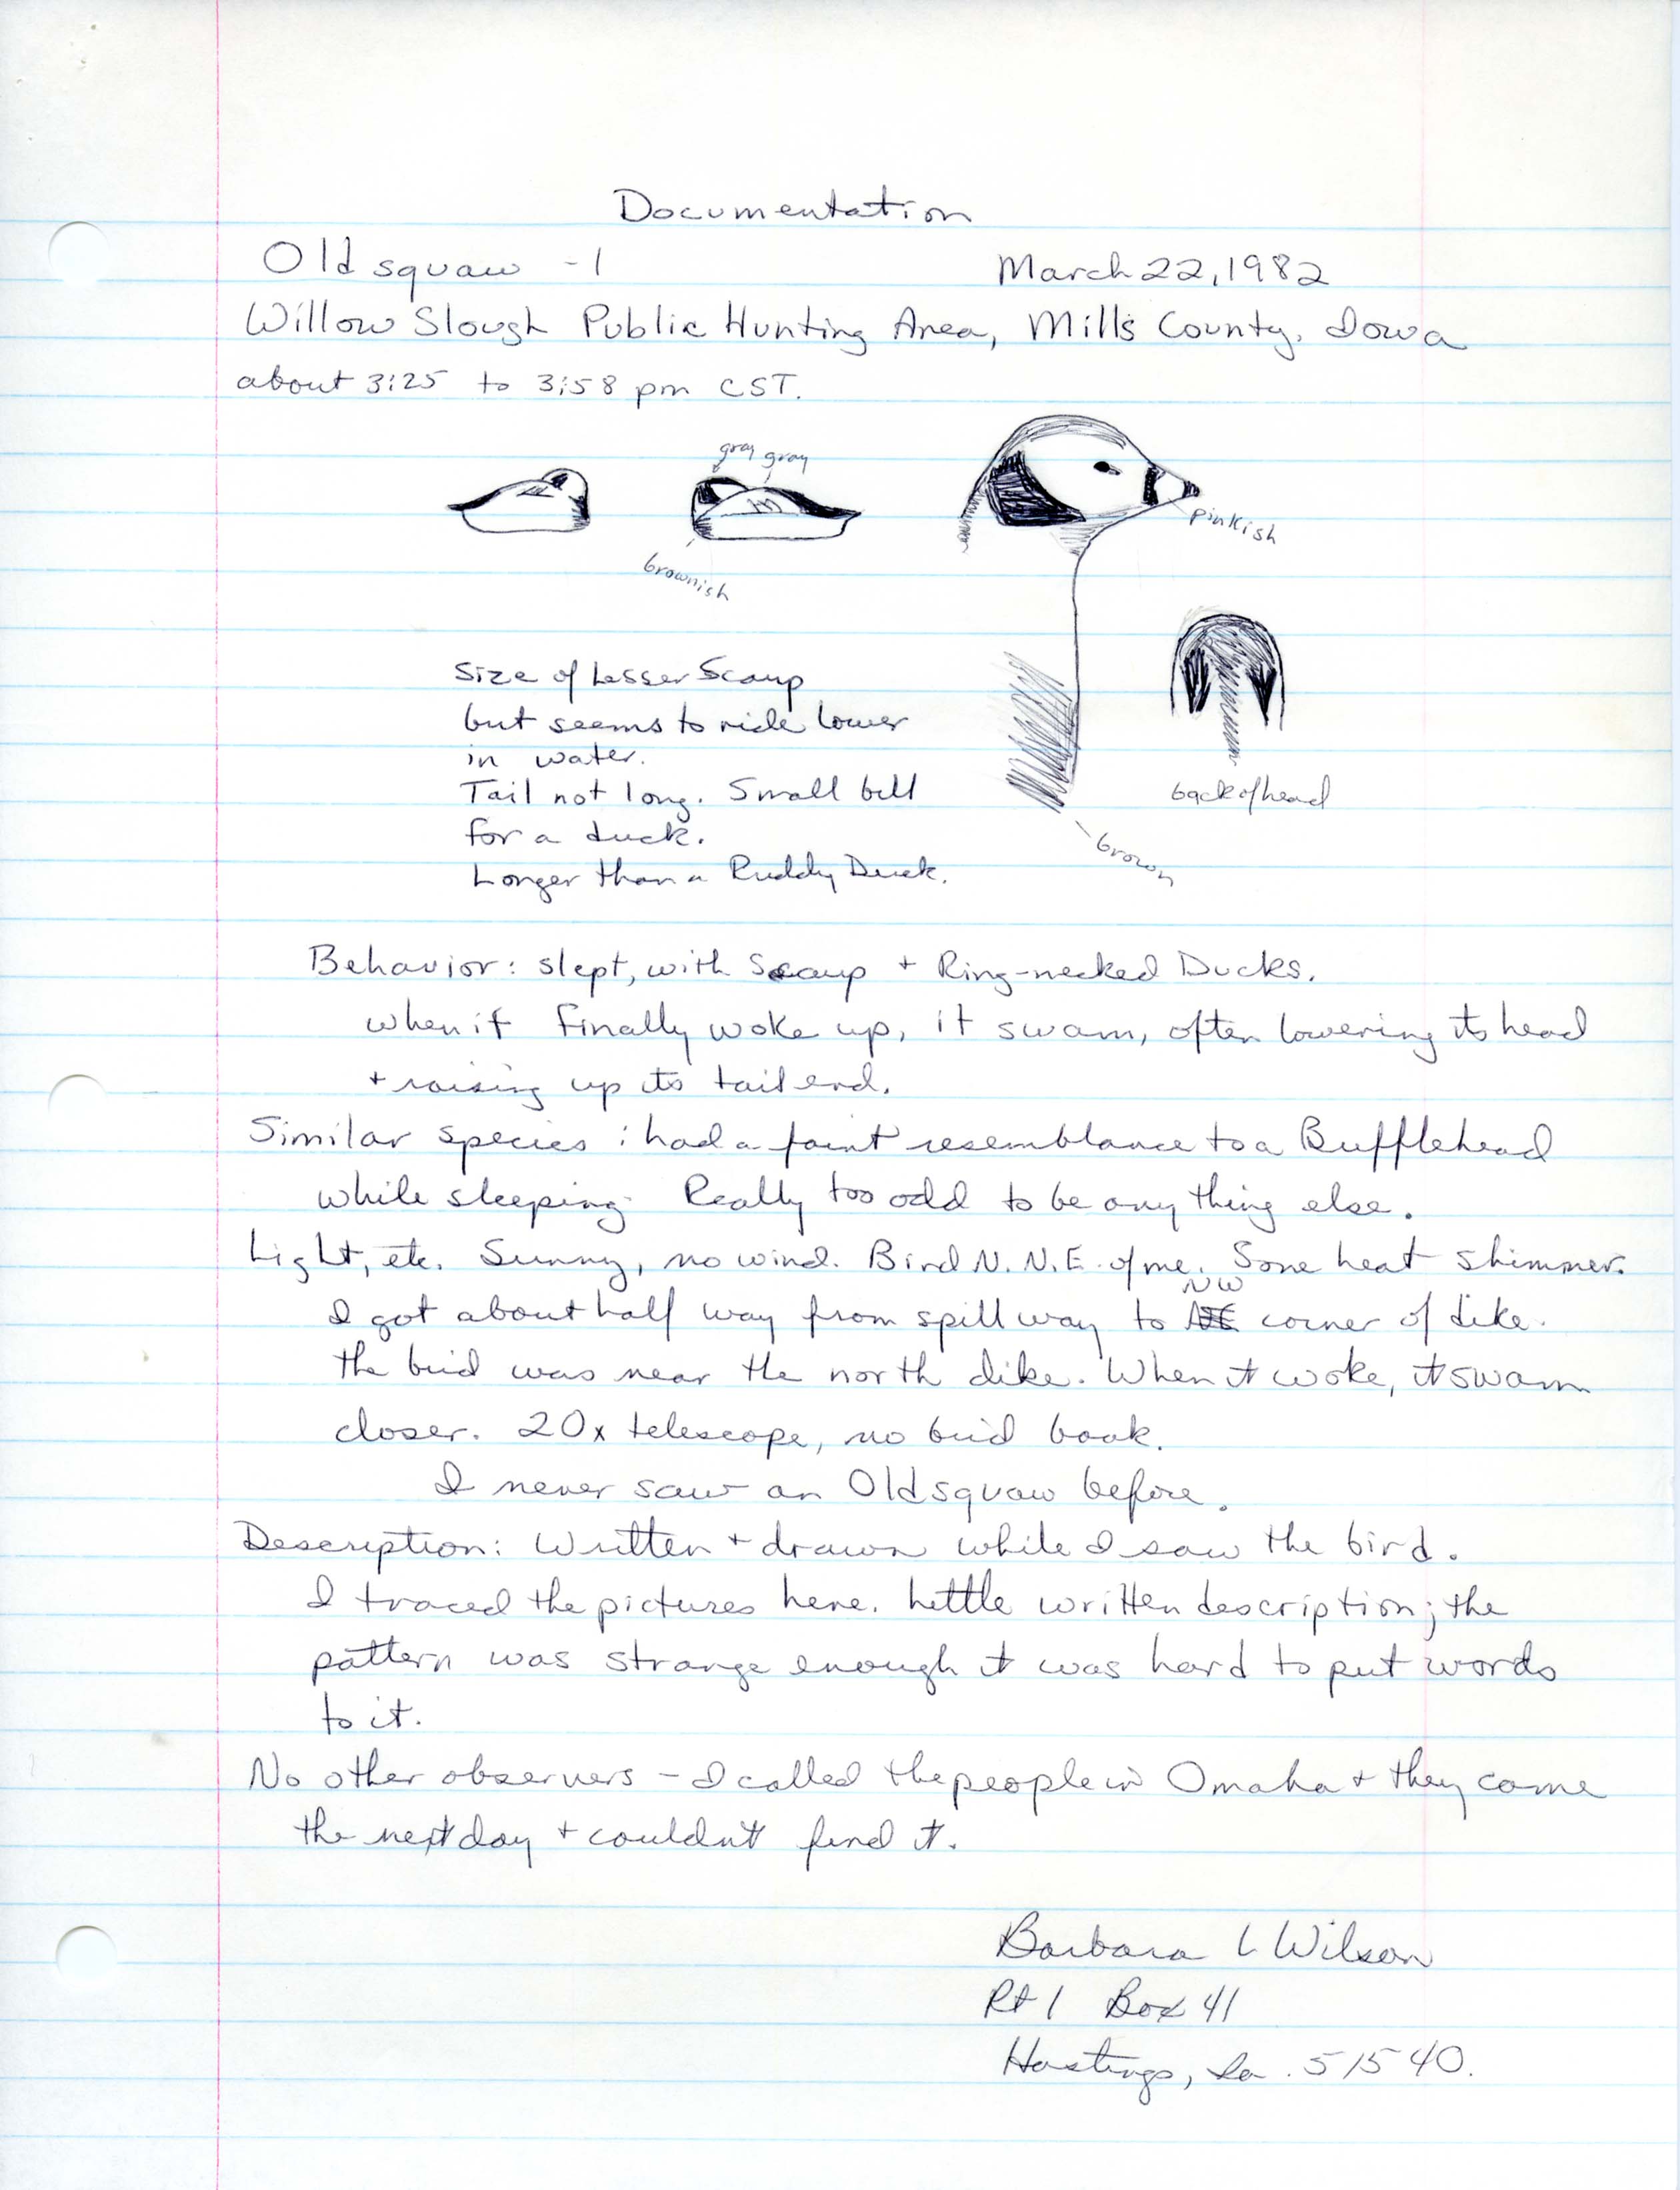 Rare bird documentation form for Long-tailed Duck at Willow Slough Public Hunting Area, 1982